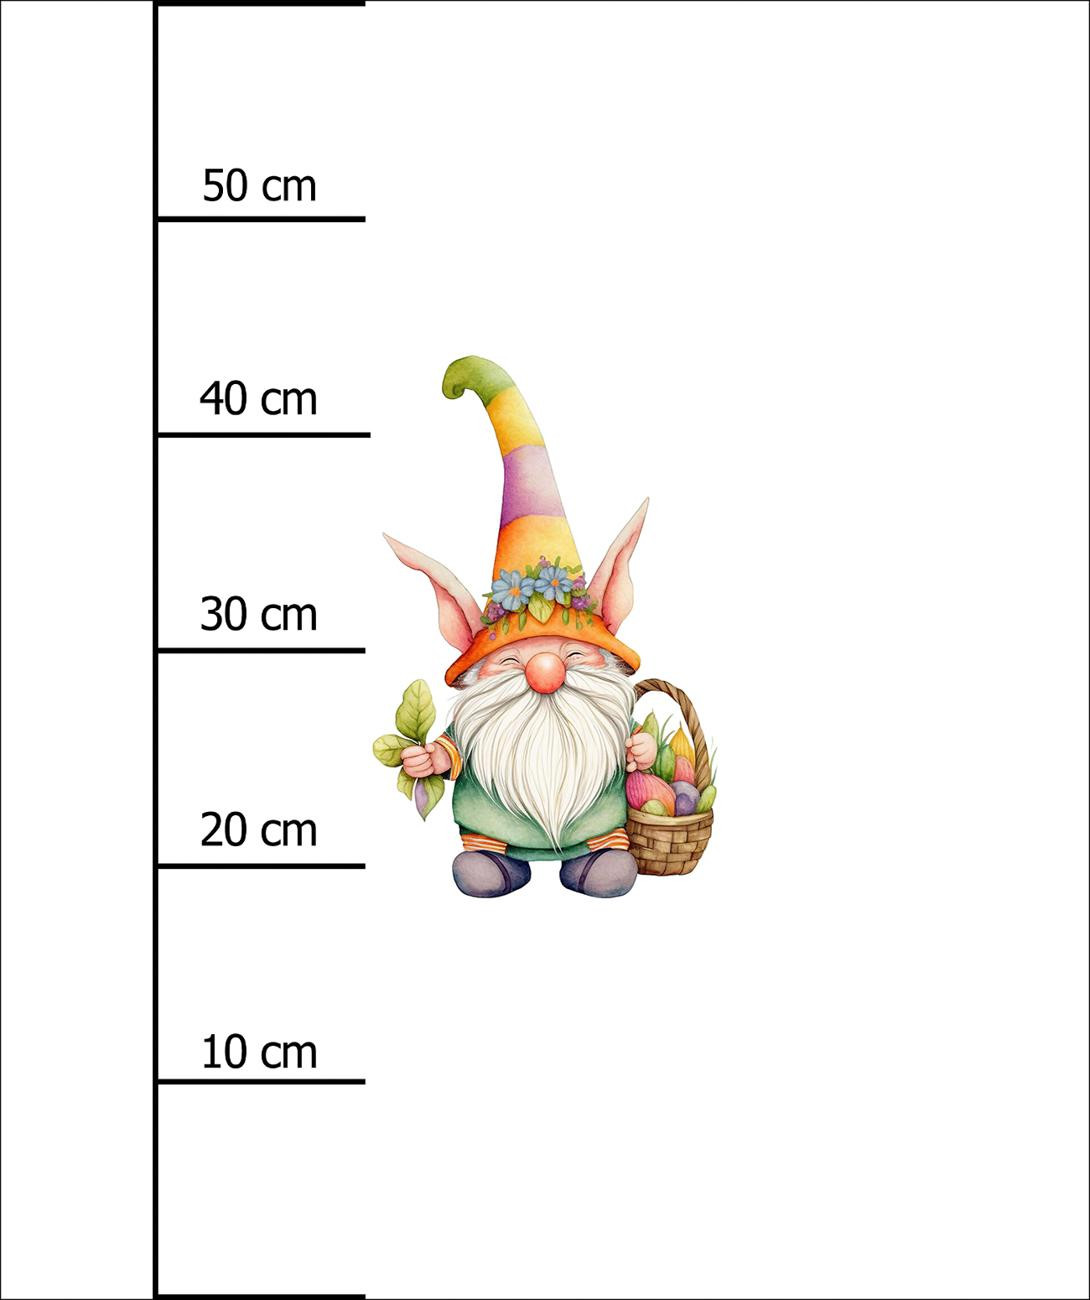 EASTER GNOME PAT. 2 - panel (60cm x 50cm) Waterproof woven fabric